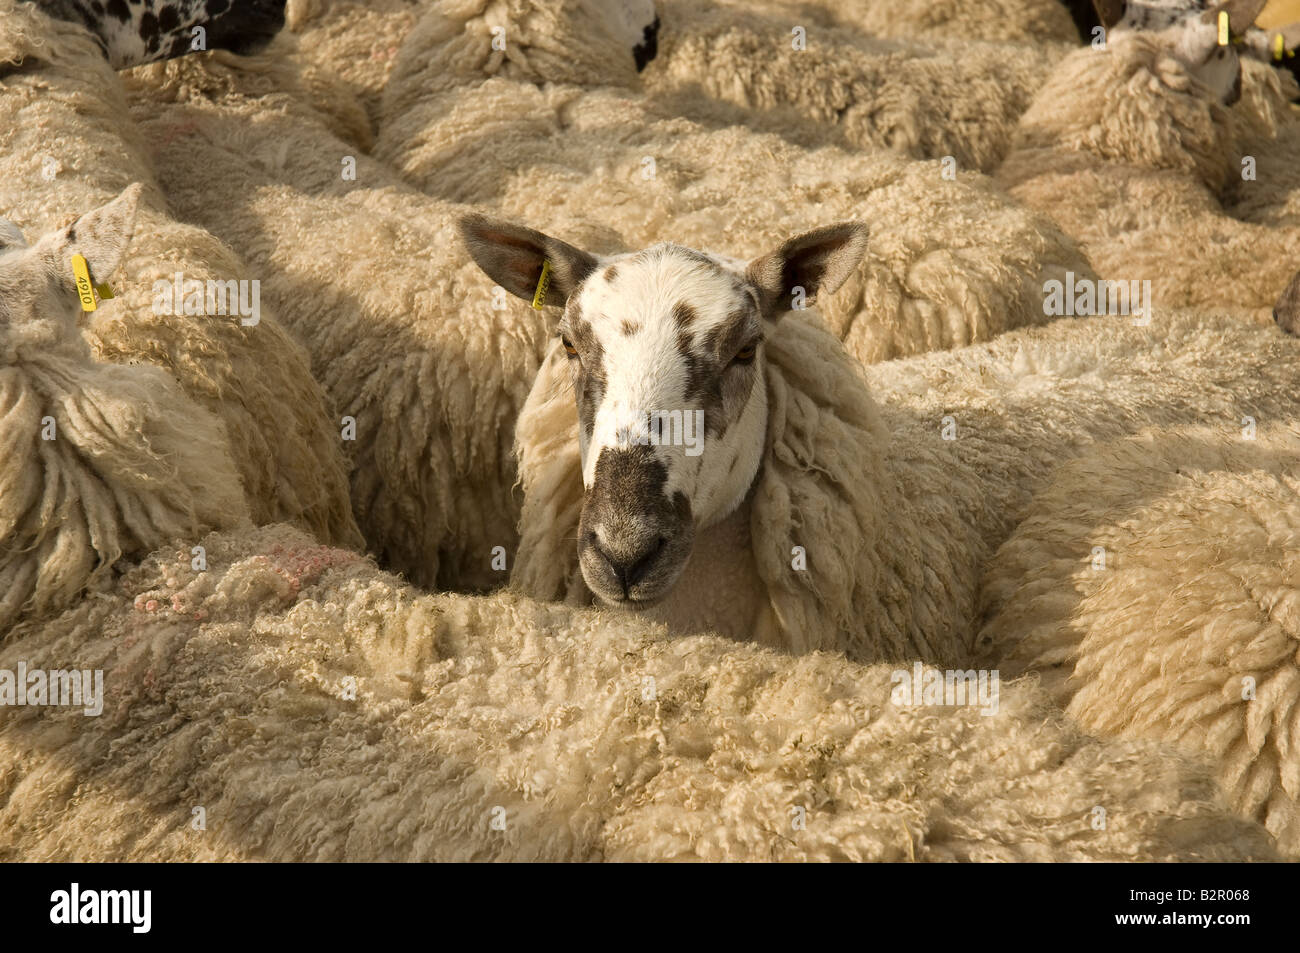 Sheep in pen close up North Yorkshire England UK United Kingdom GB Great Britain Stock Photo